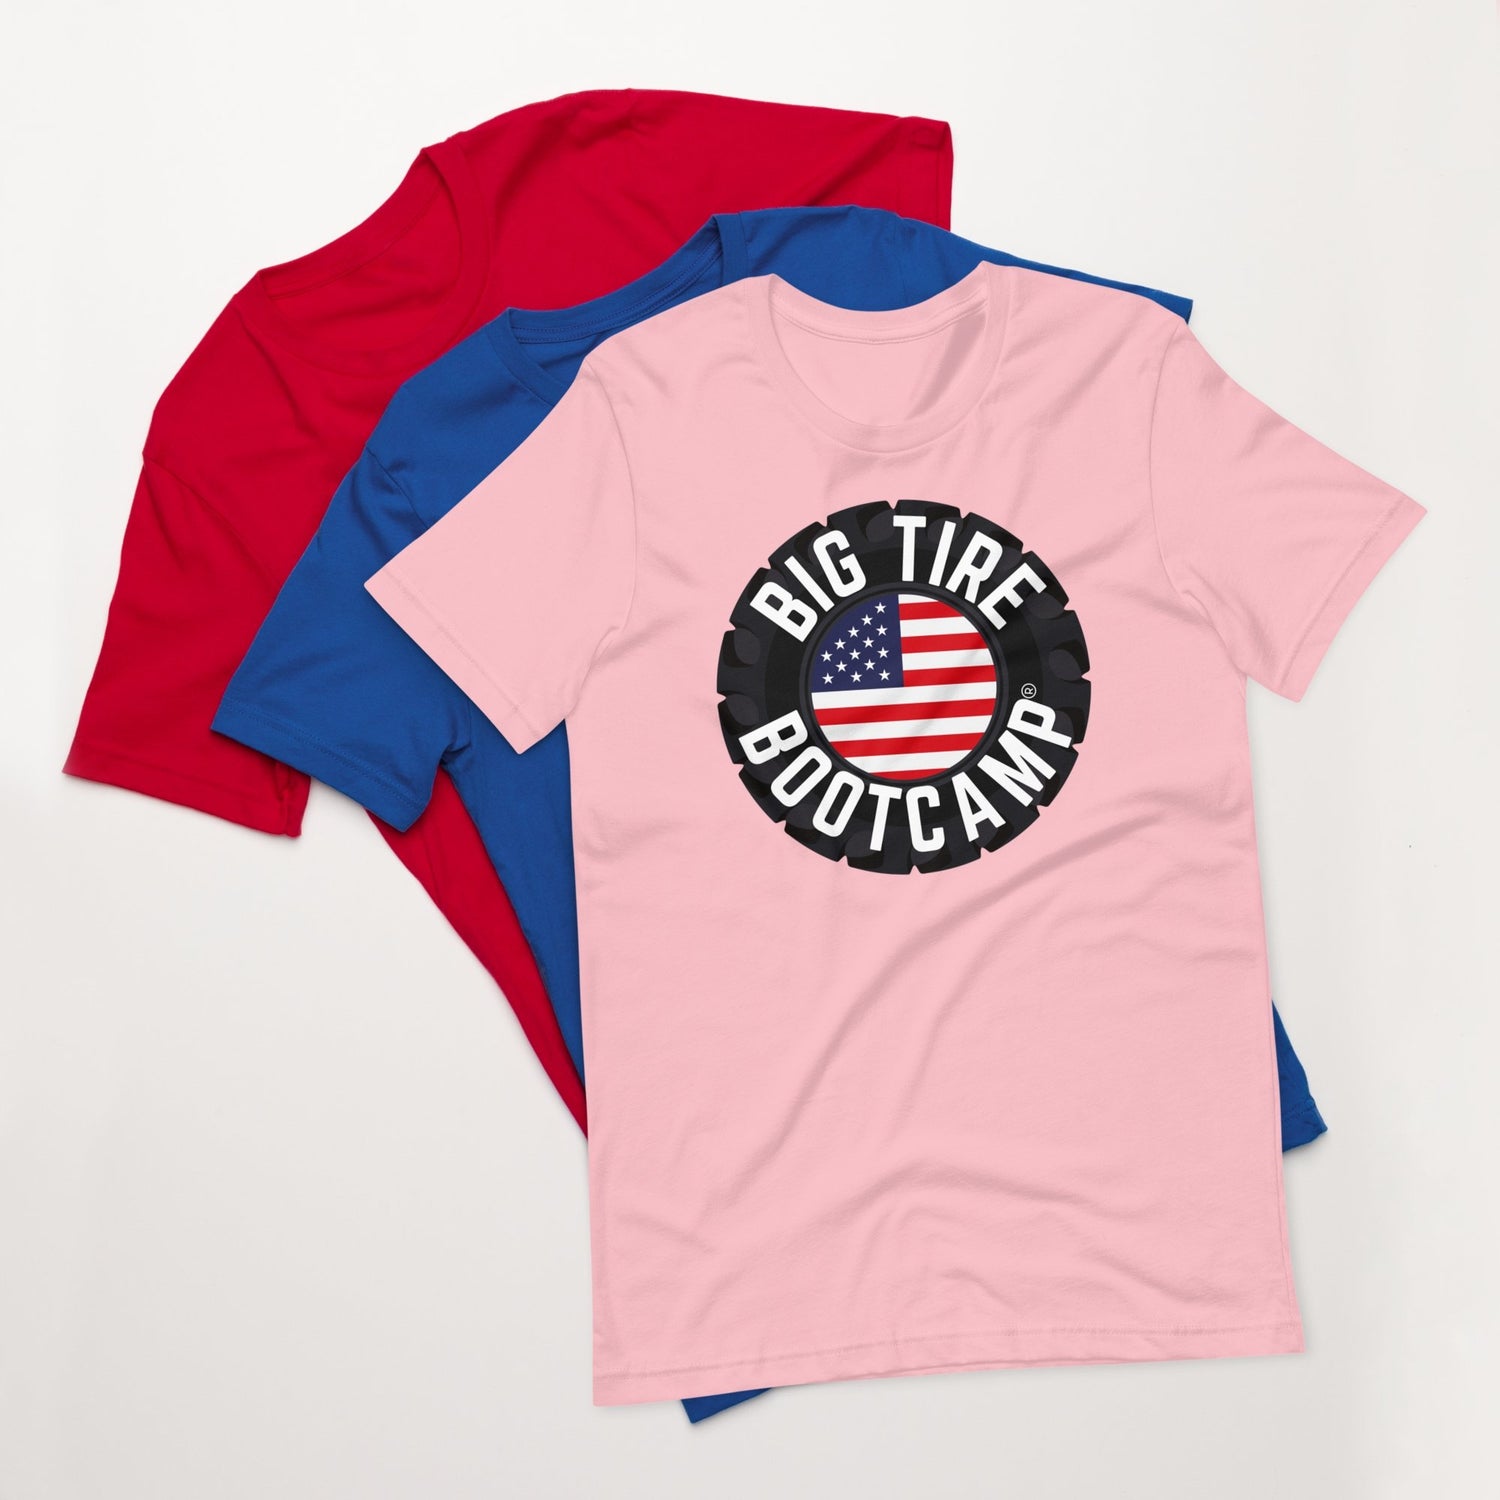 Big Tire Bootcamp T-Shirt - For Fathers Fitness